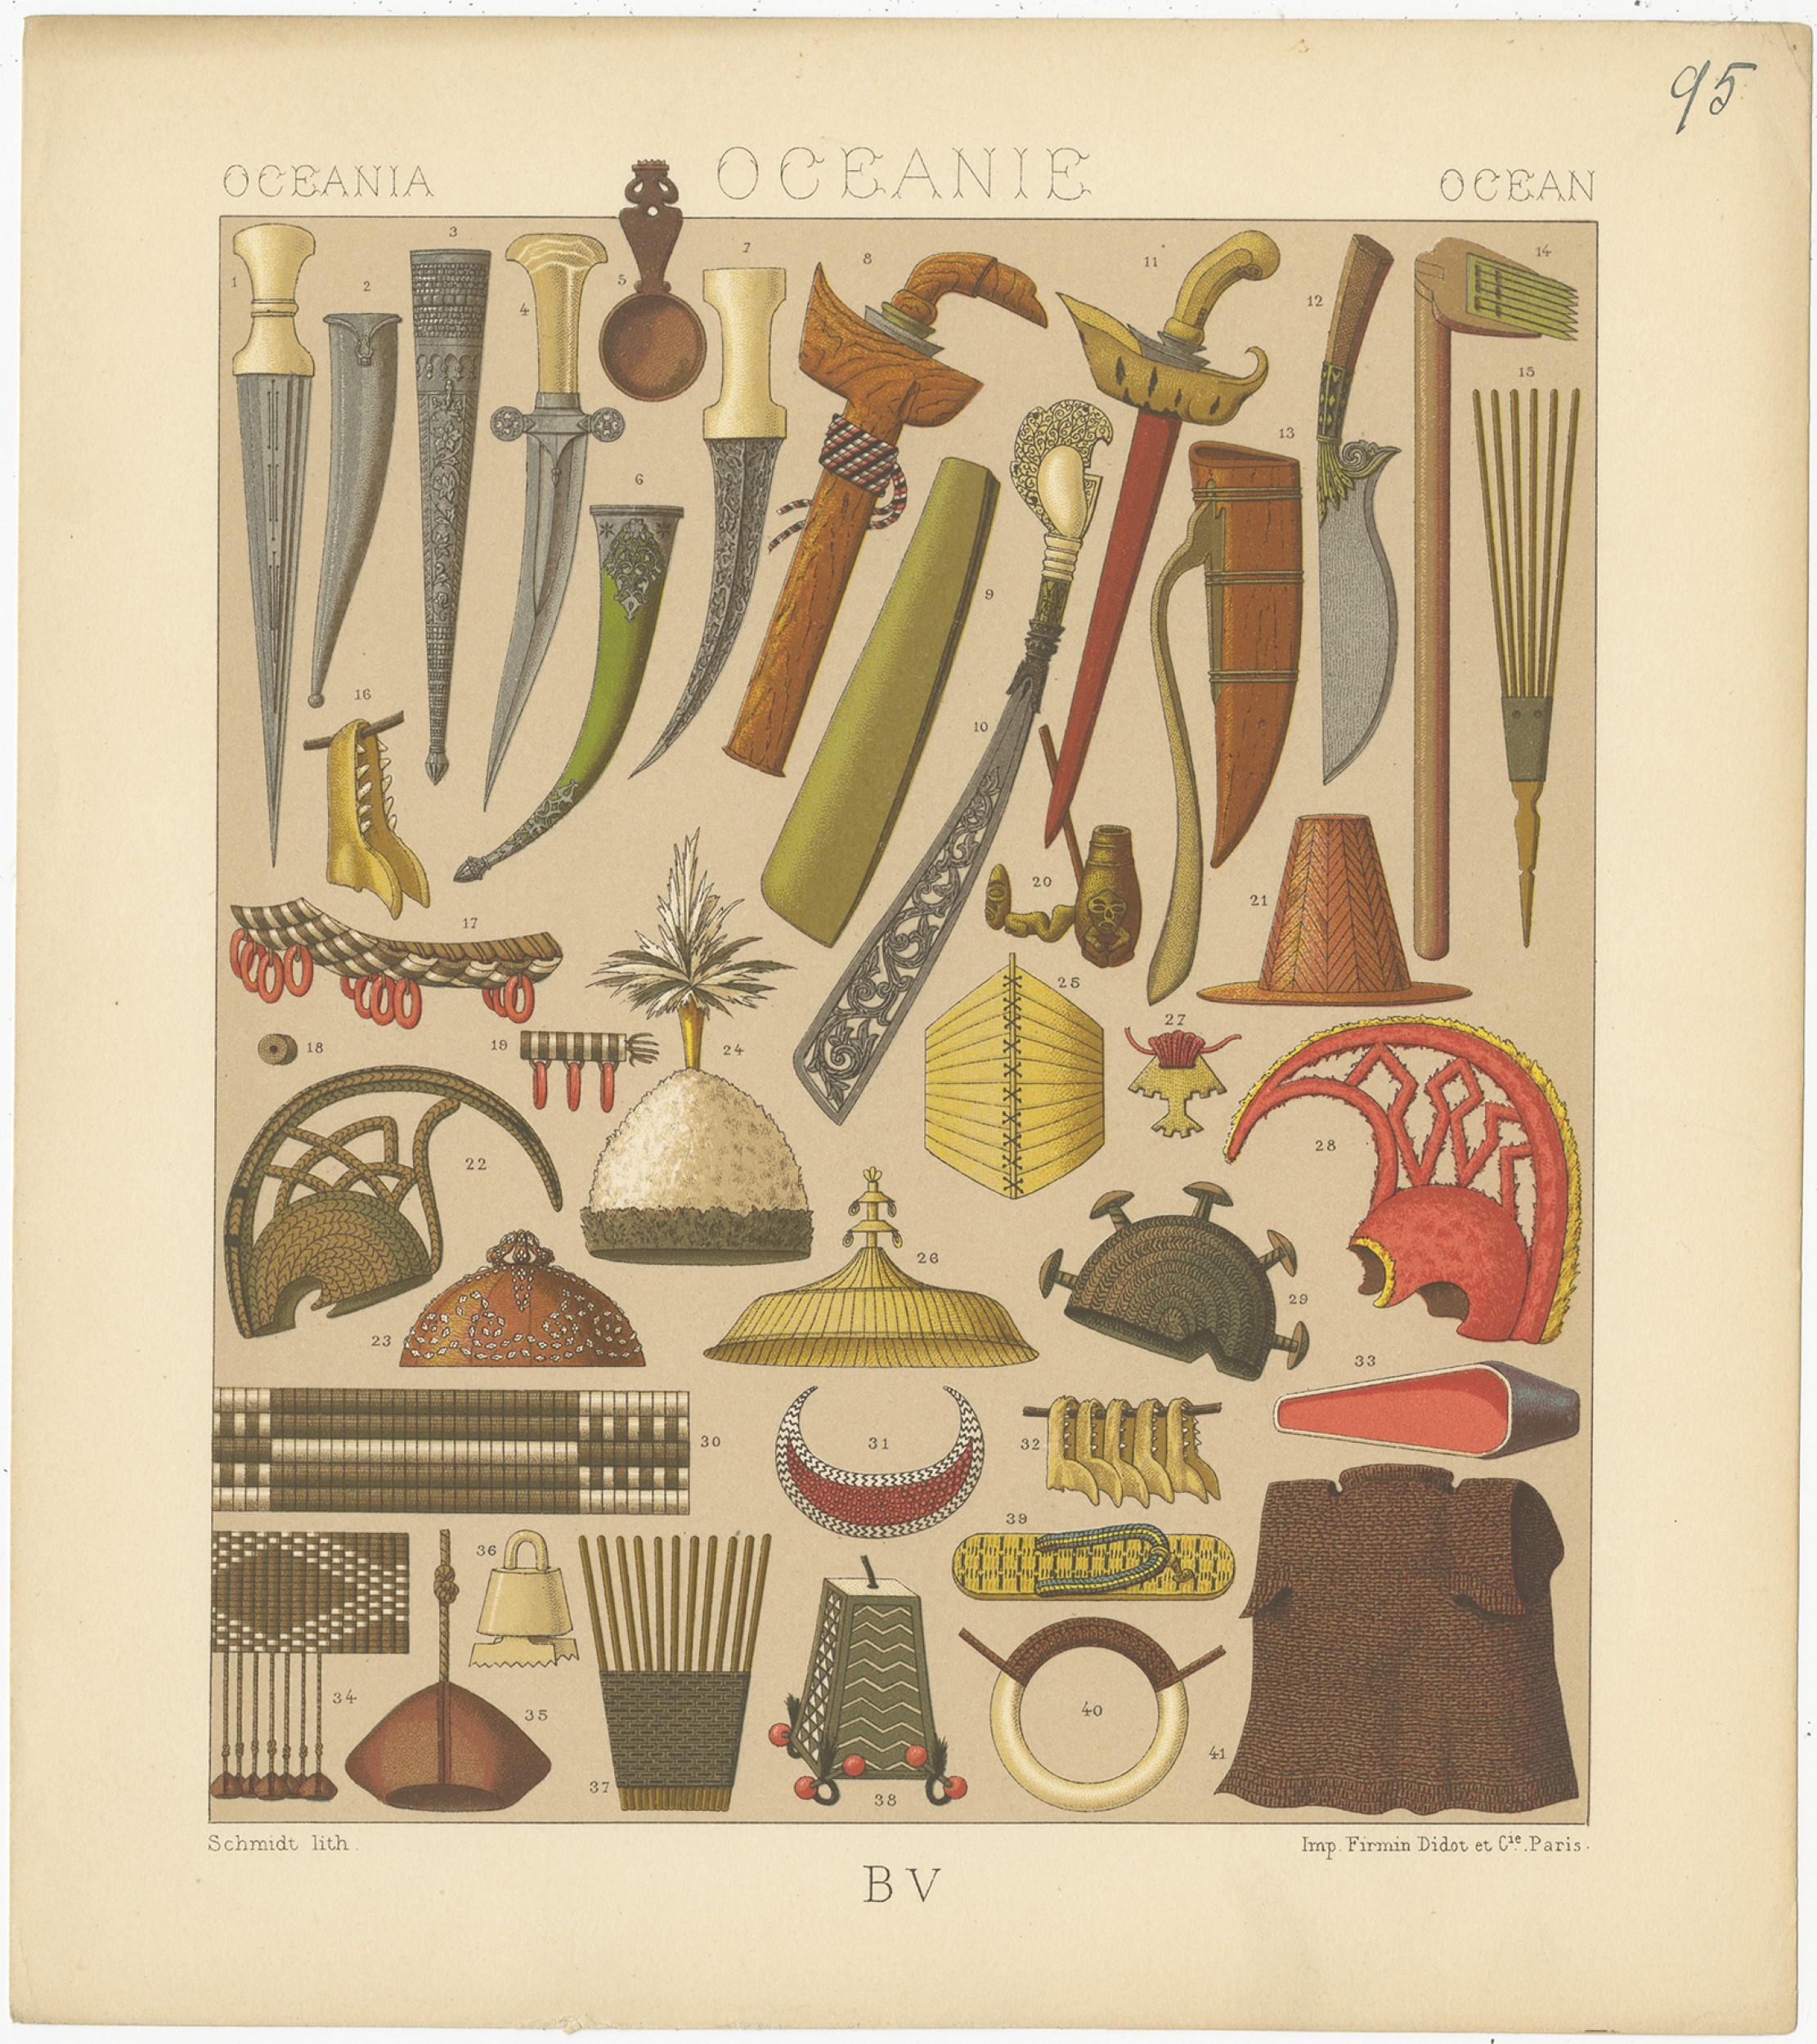 Antique print titled 'Oceania - Oceanie - Ocean'. Chromolithograph of Oceanian Decorative Objects. This print originates from 'Le Costume Historique' by M.A. Racinet. Published, circa 1880.